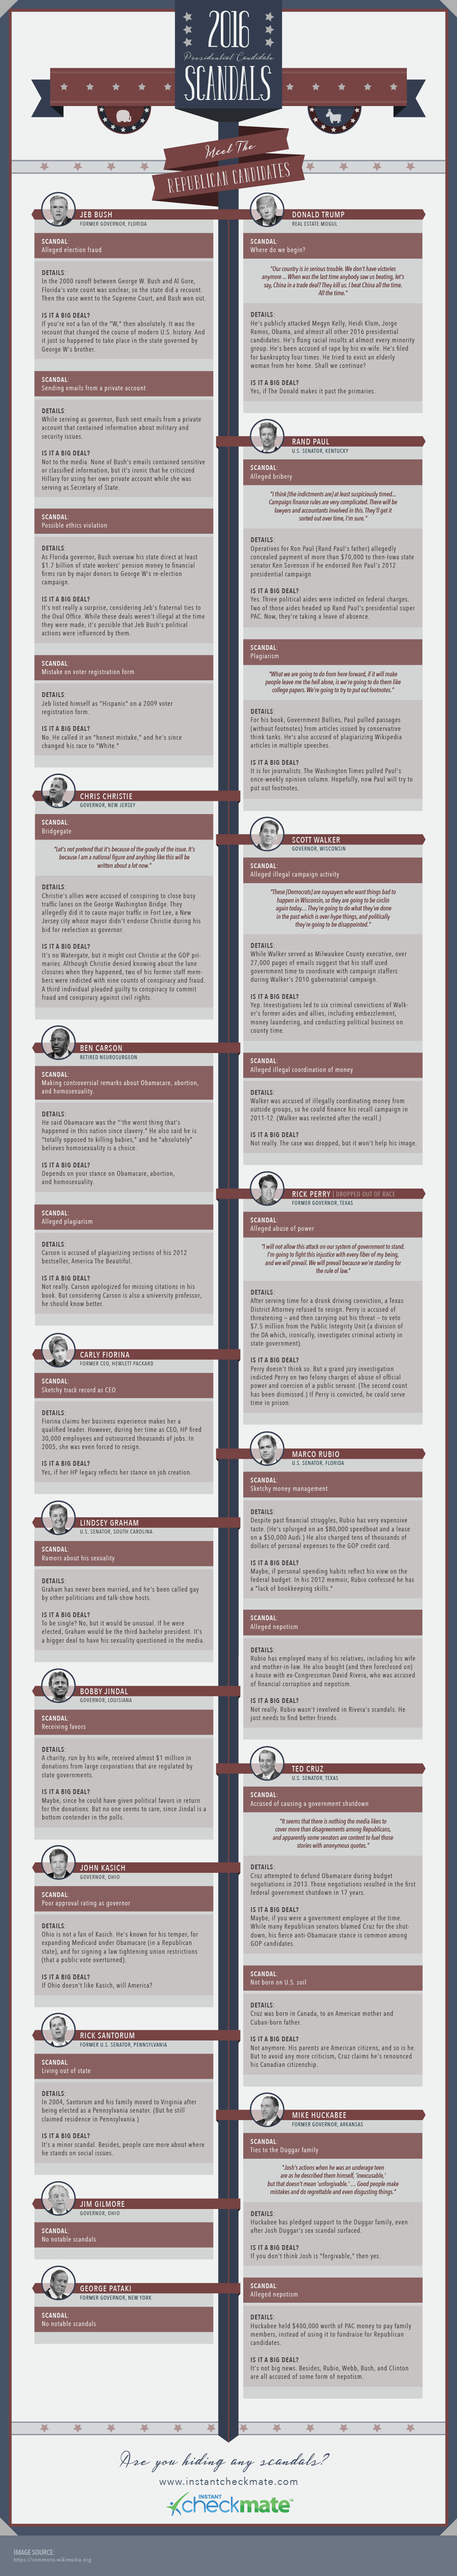 Biggest Scandals Republican Presidential Candidates infographics